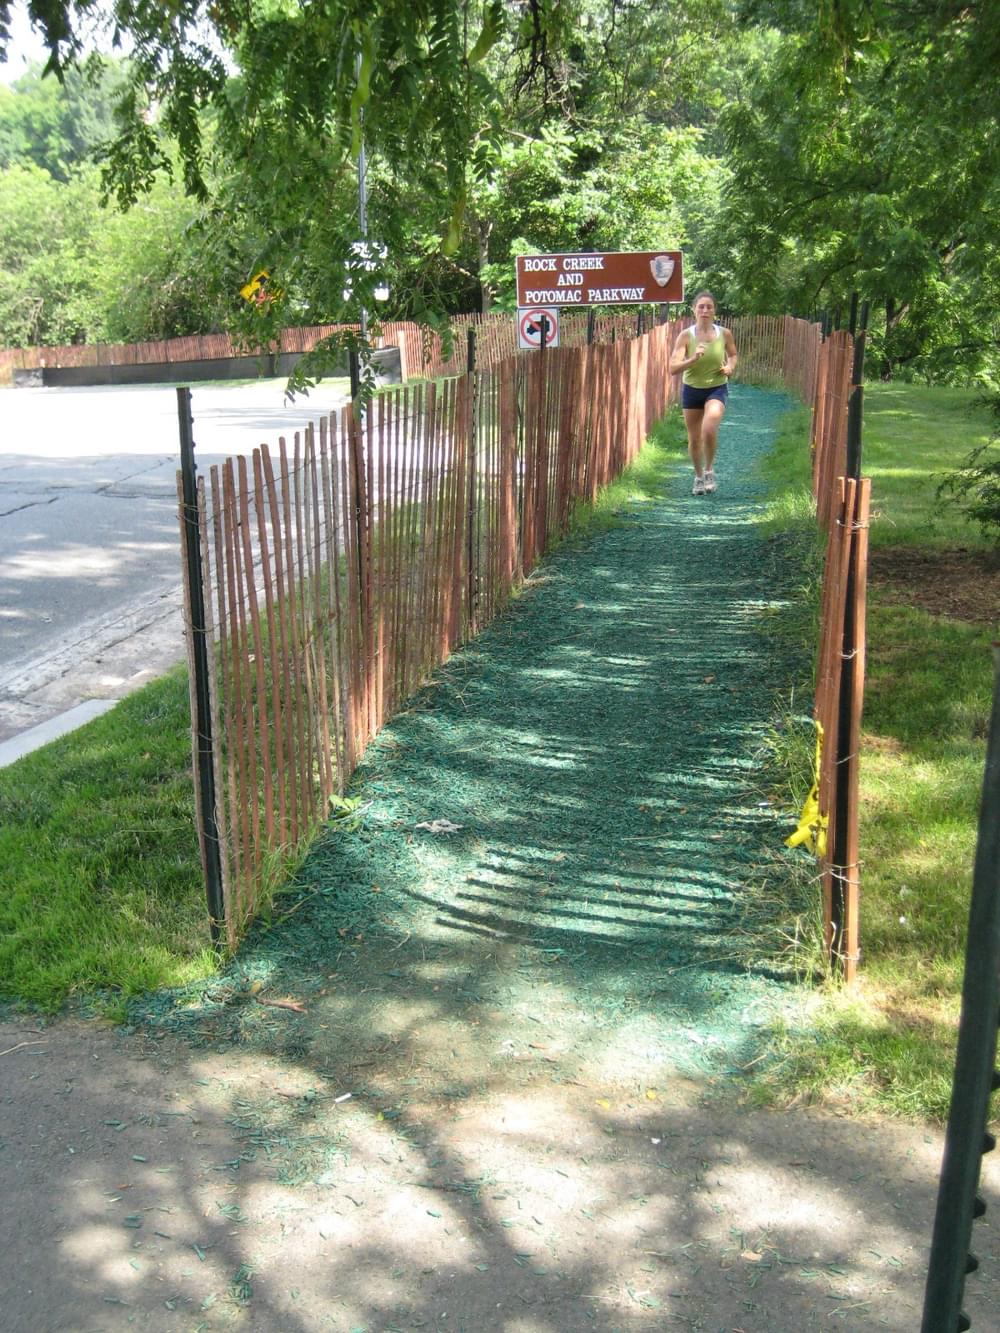 Detour is fenced and surfaced with wood chips dyed green, for some reason; Rock Creek Trail, Washington, DC